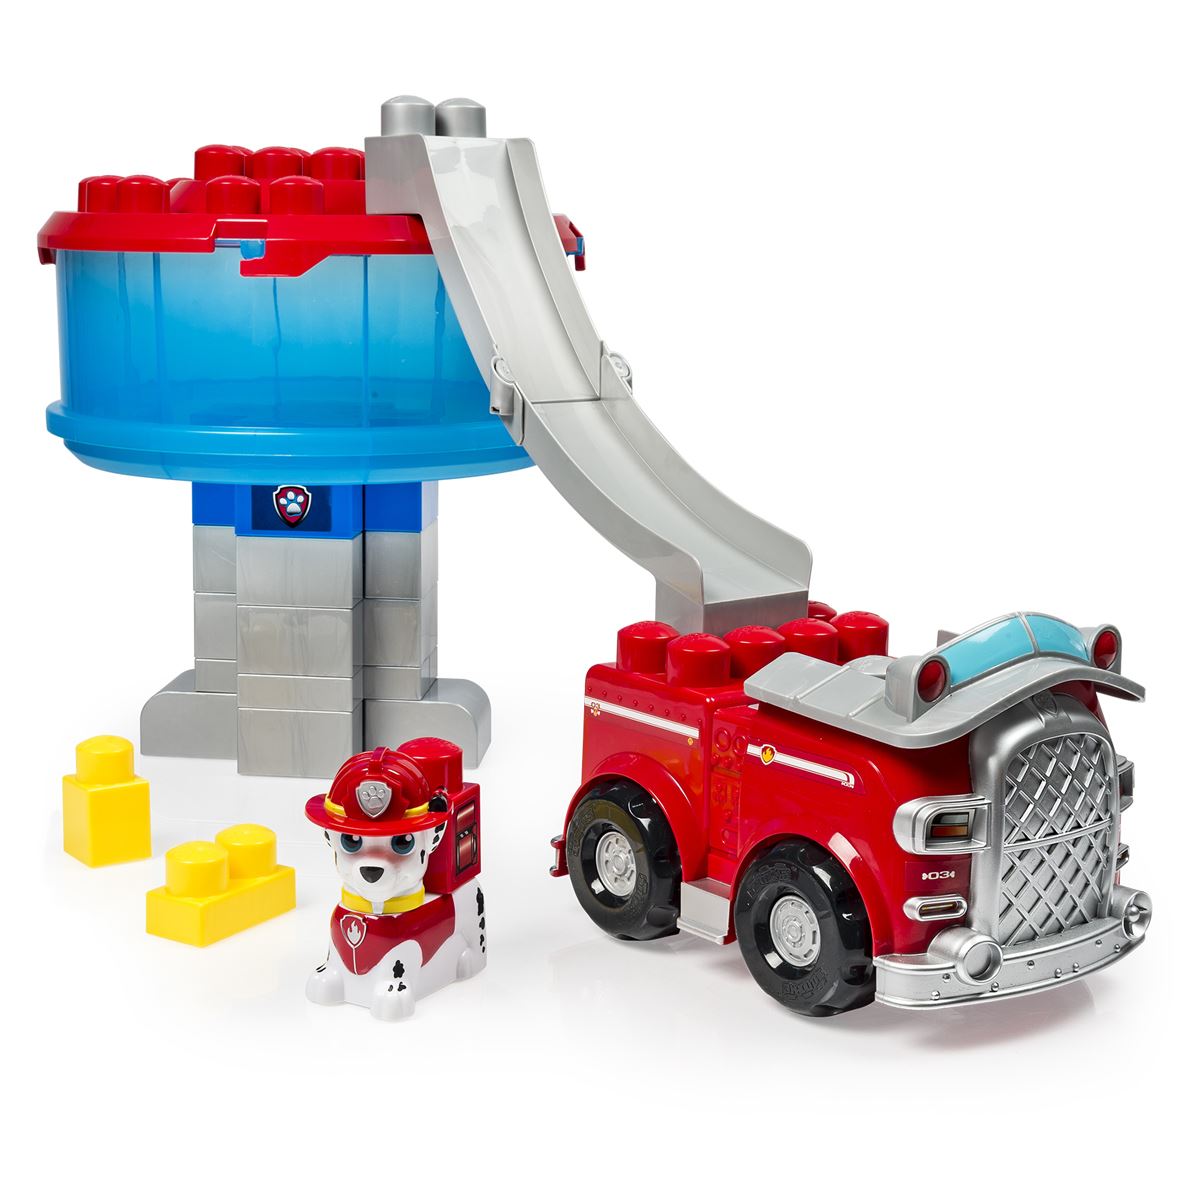 Paw Patrol Construct the Lookout